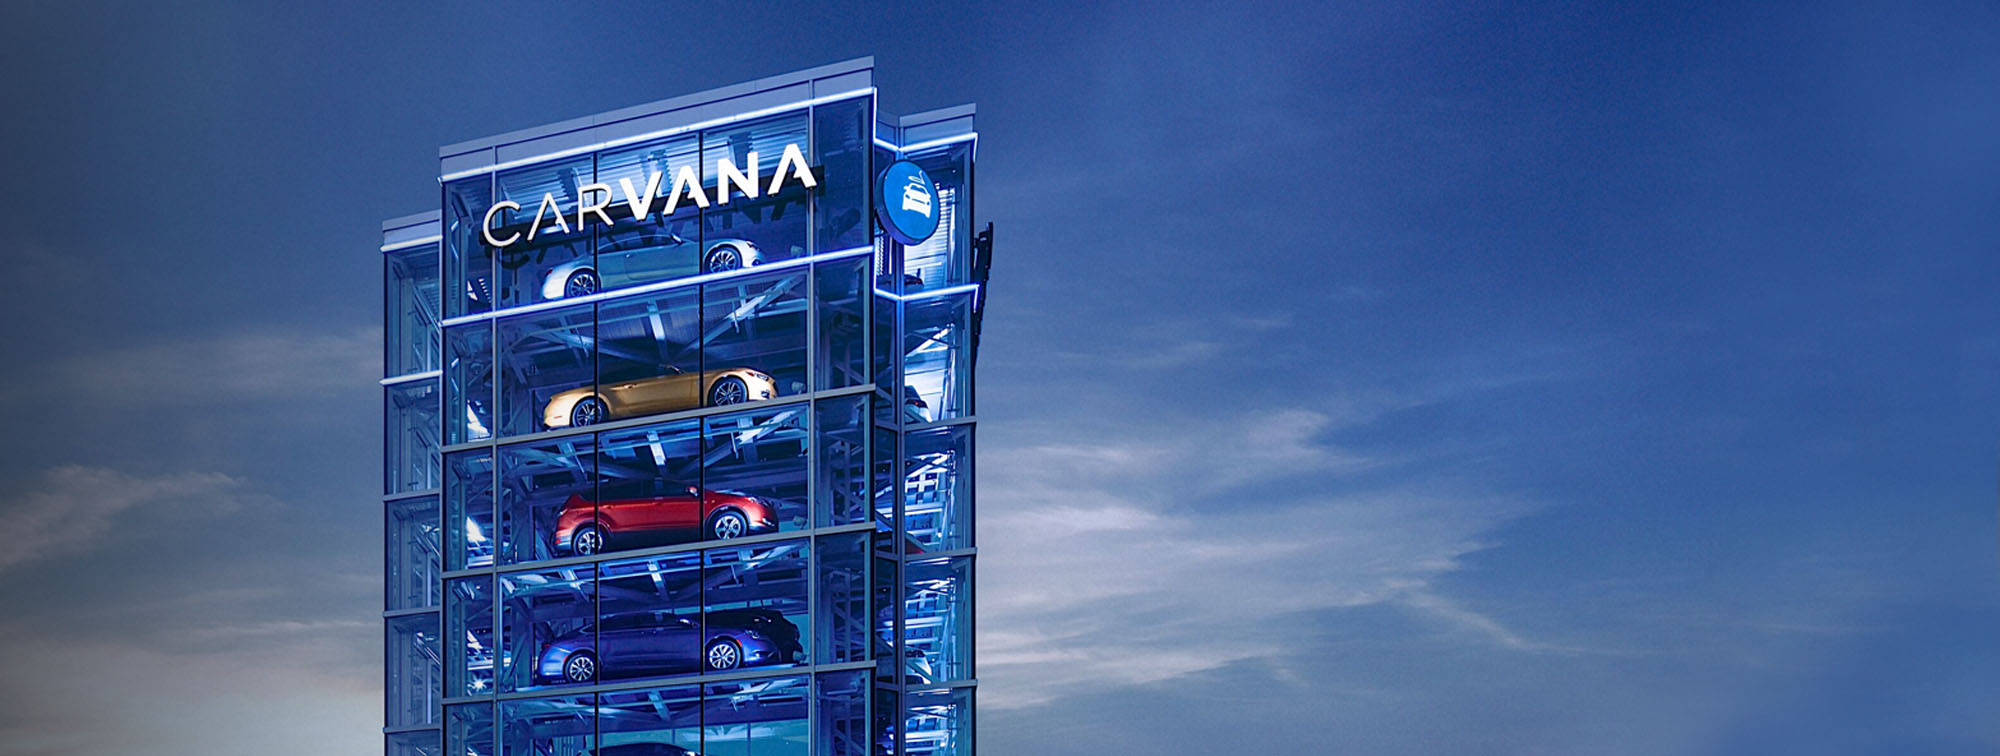 Image of Carvana building